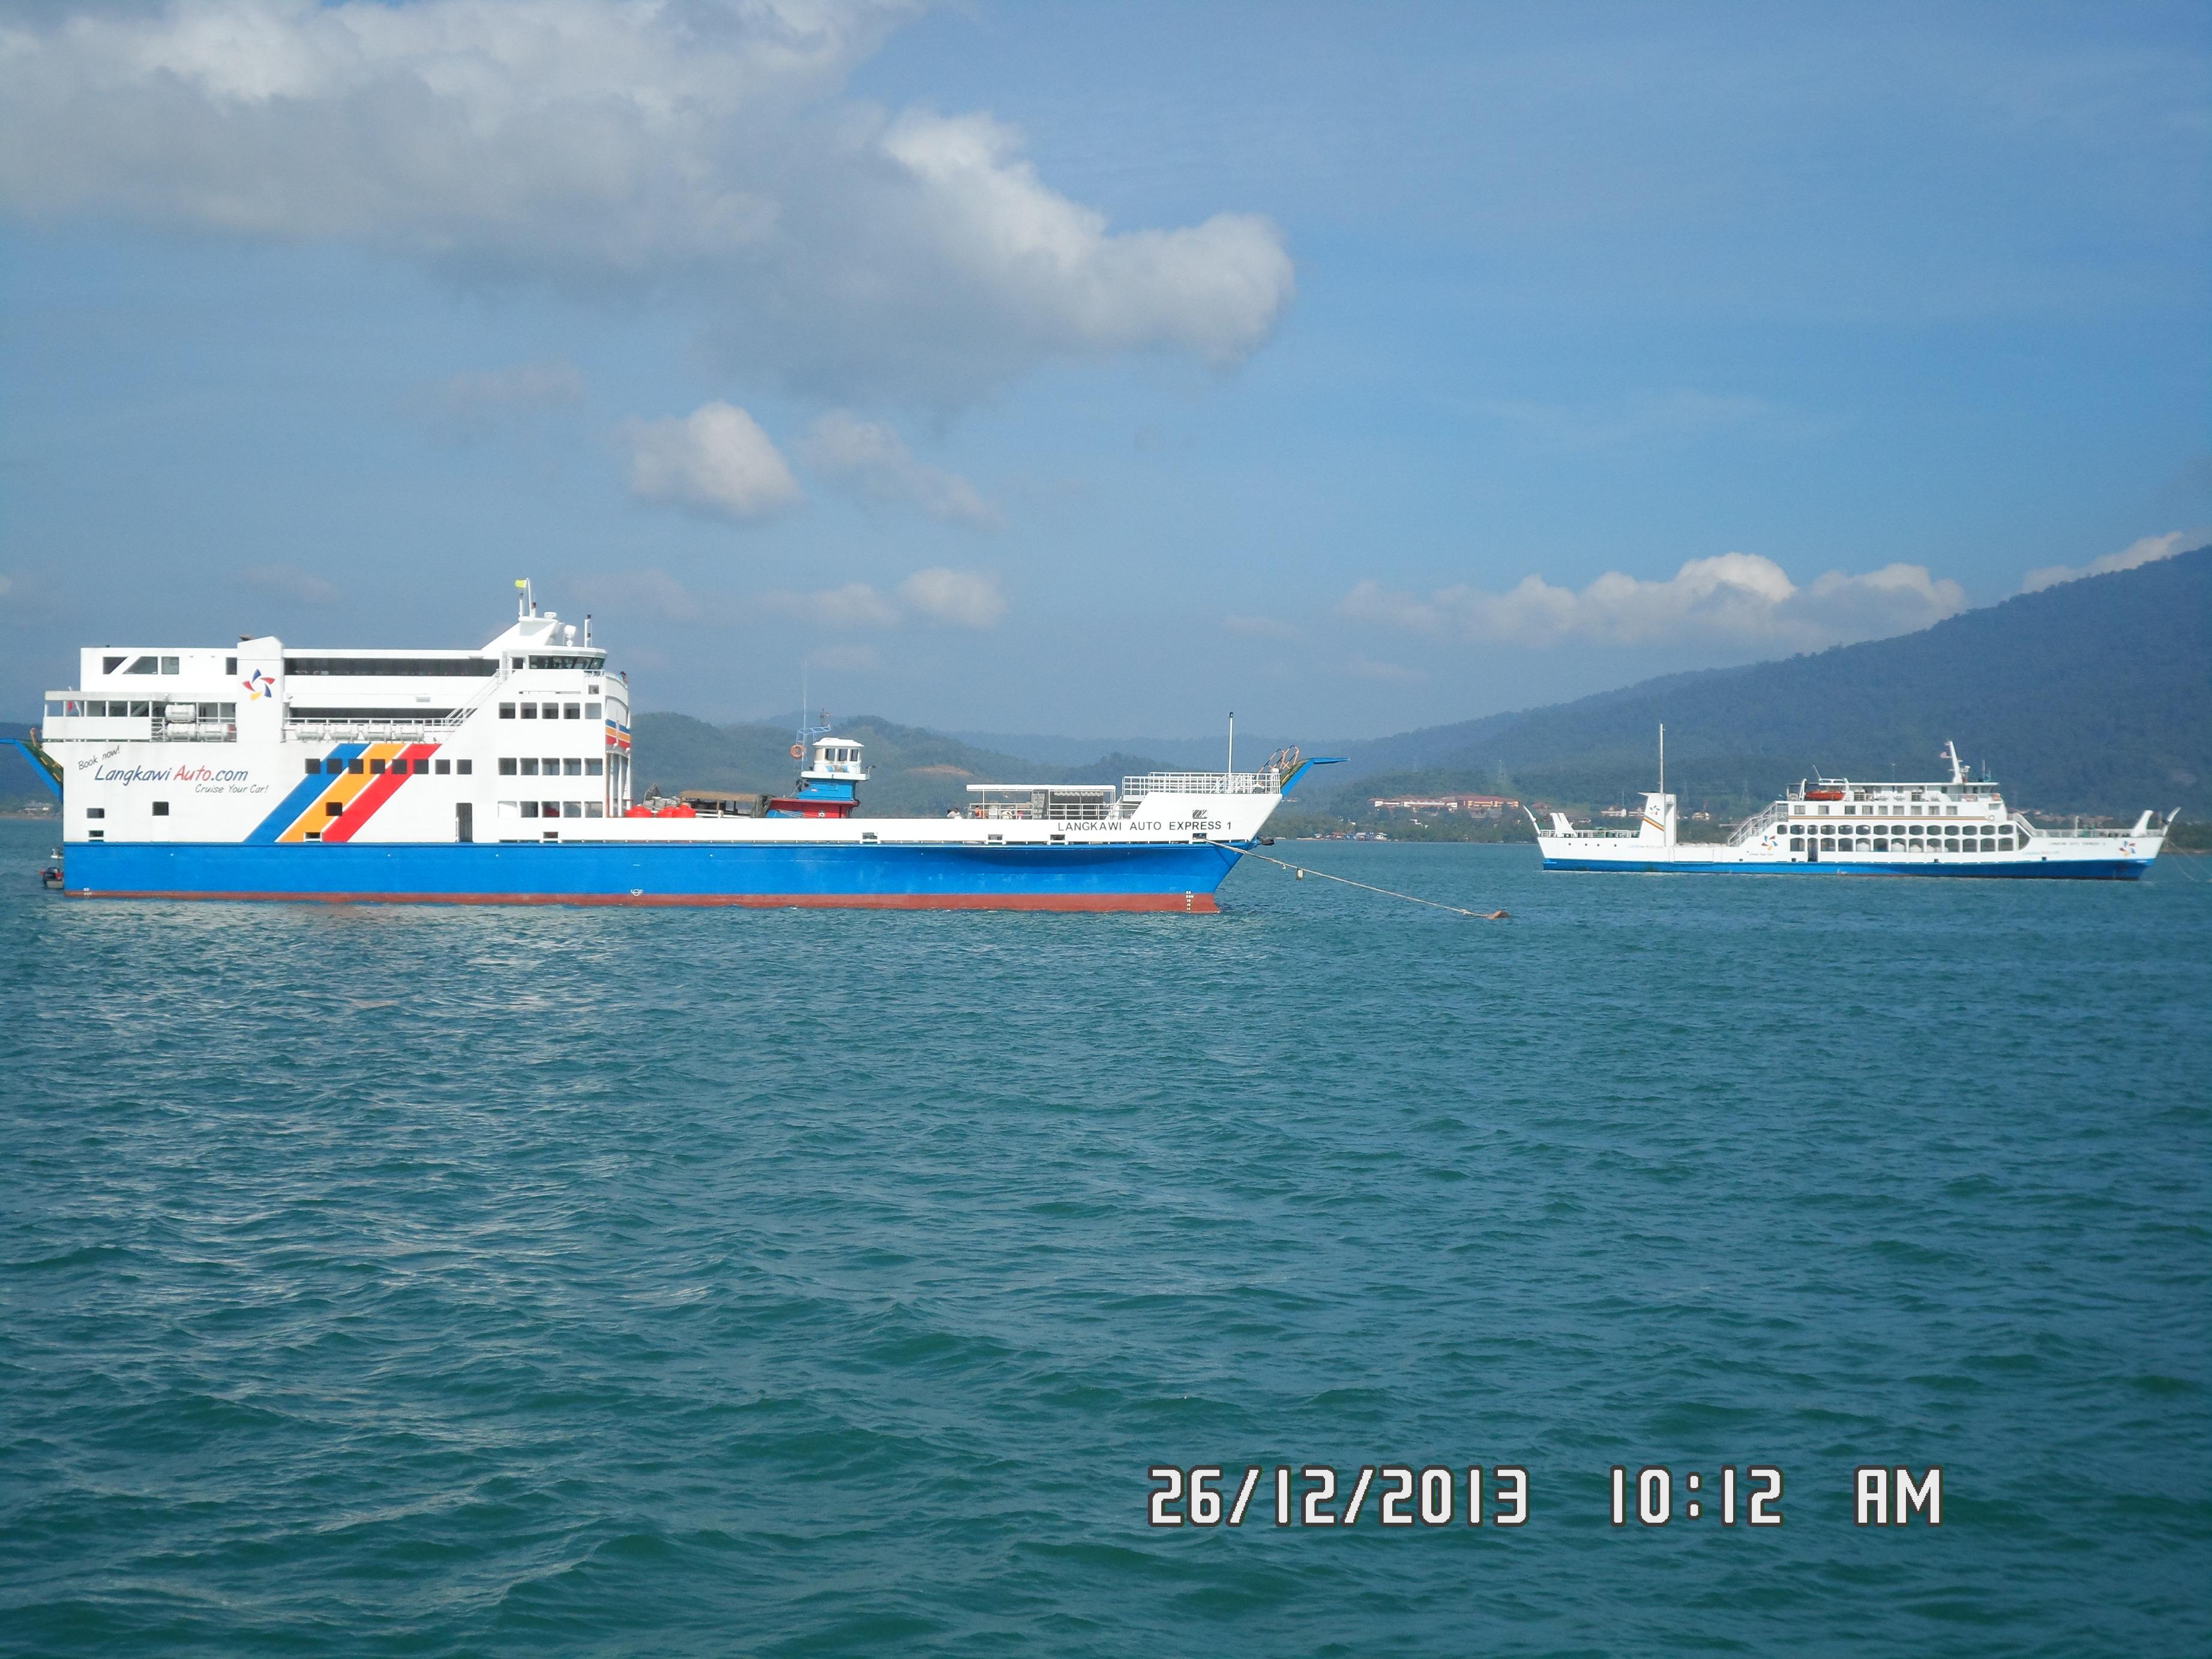 Langkawi auto ferry